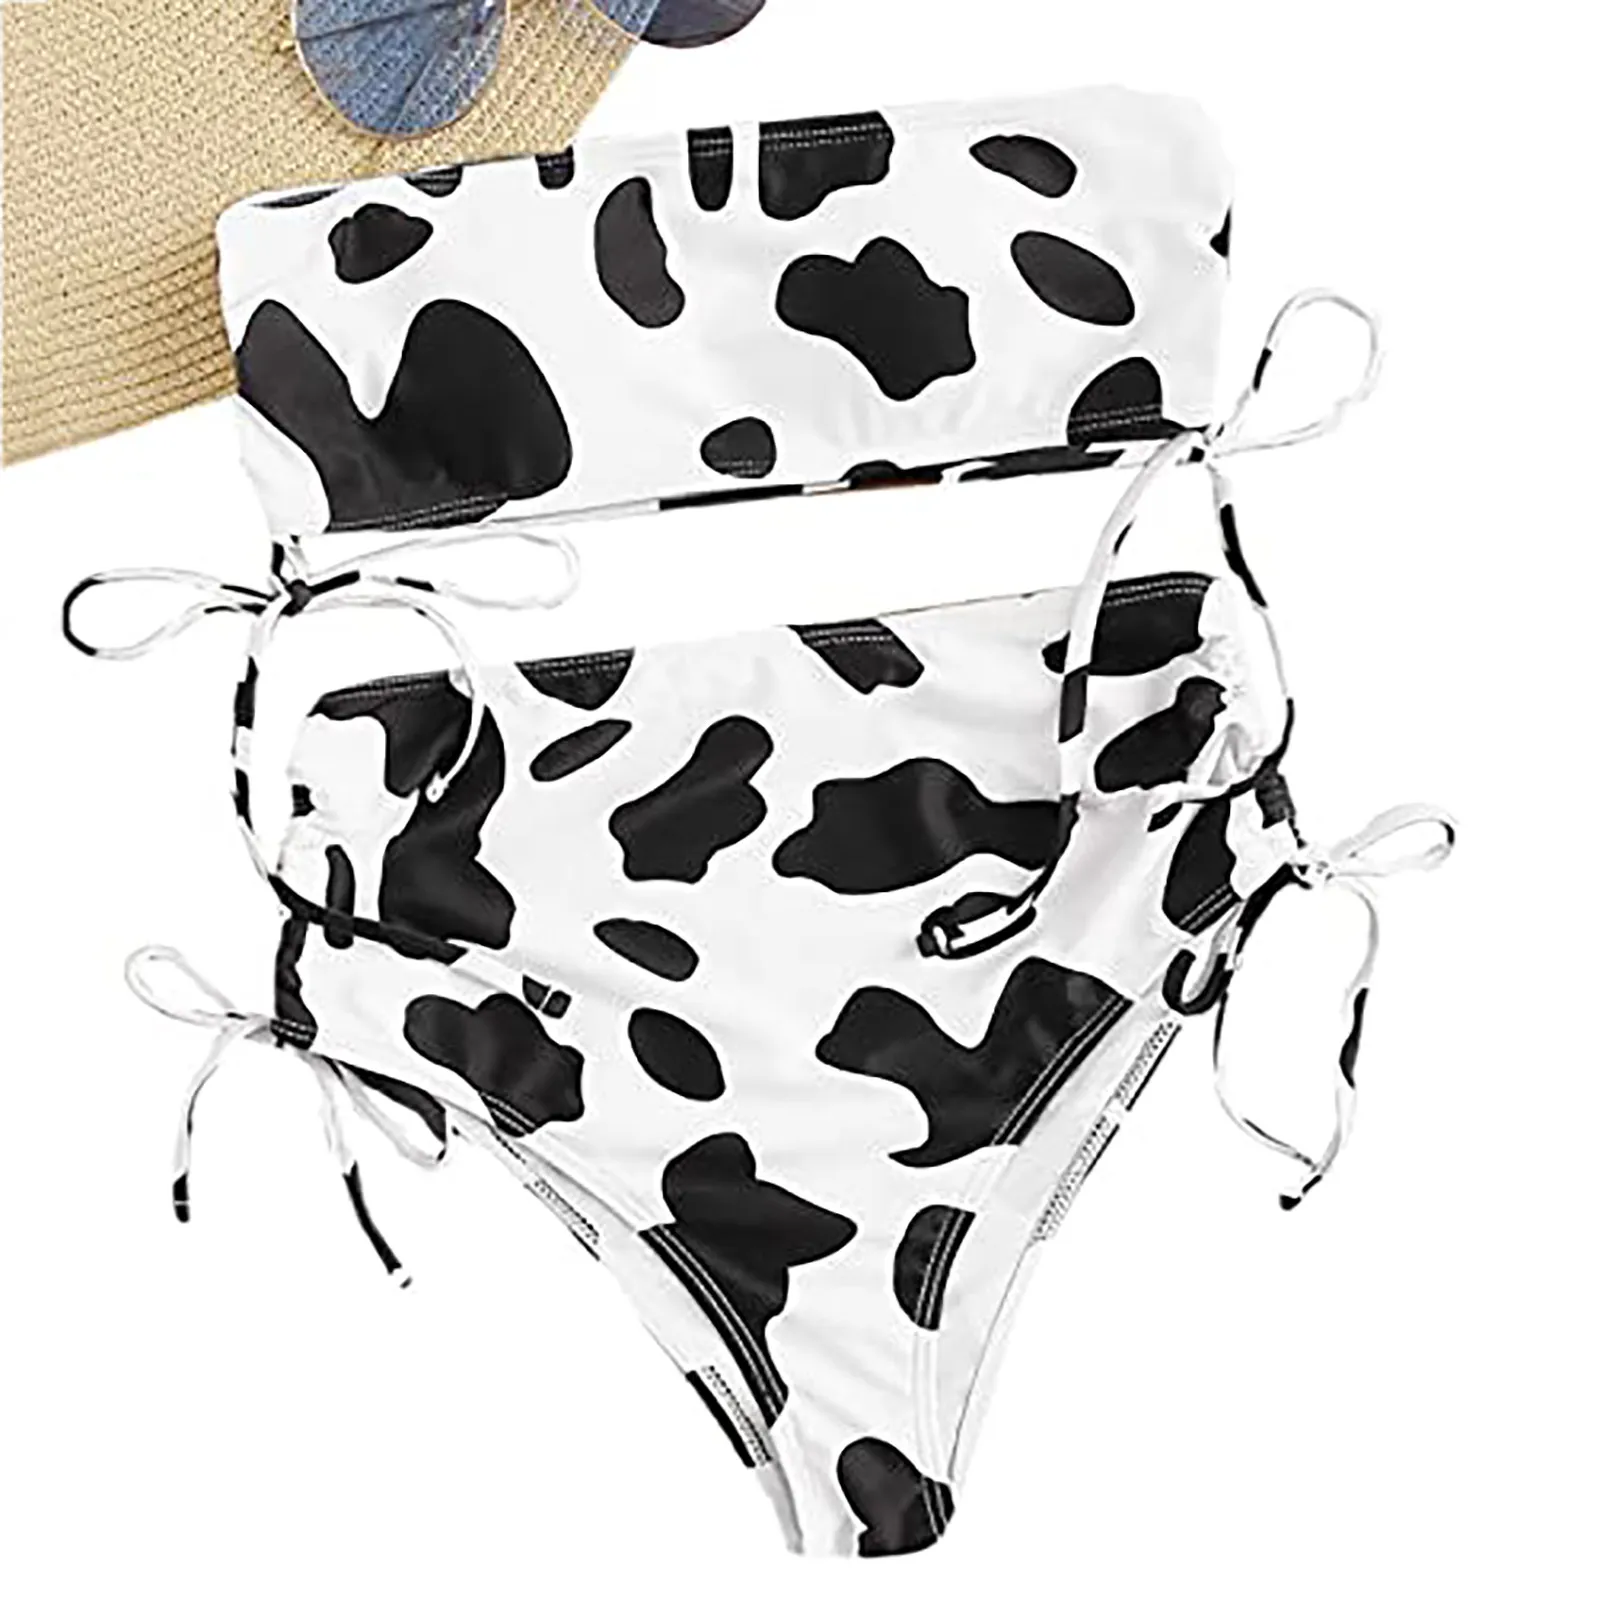 Hb060558061c44c52bf263df581c1d6a18 - The Cow Print